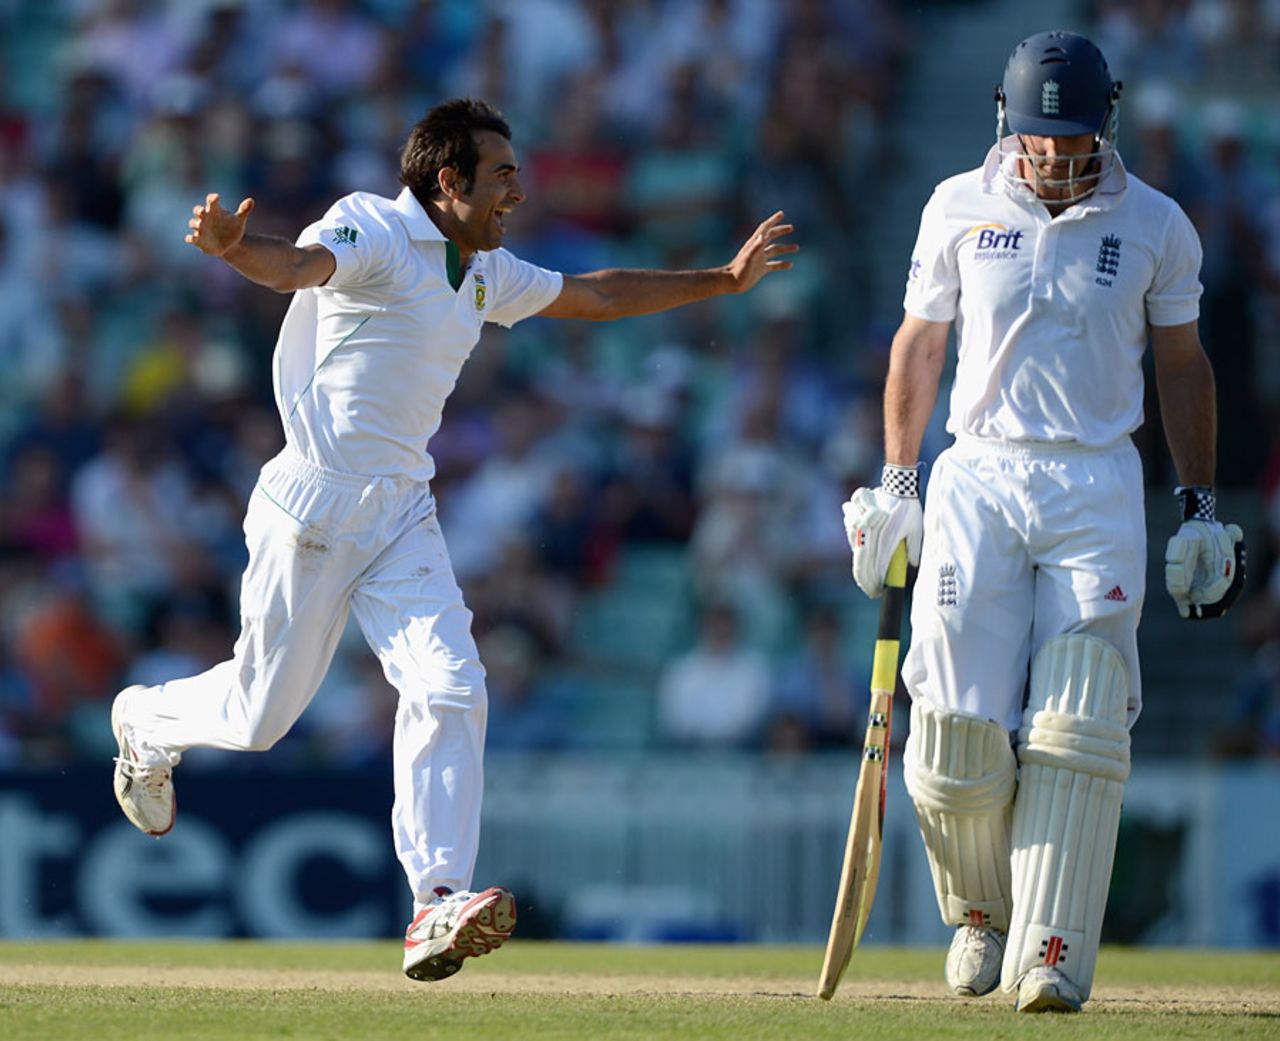 Imran Tahir capped South Africa's day by removing Andrew Strauss, England v South Africa, 1st Investec Test, The Oval, 4th day, July, 22, 2012